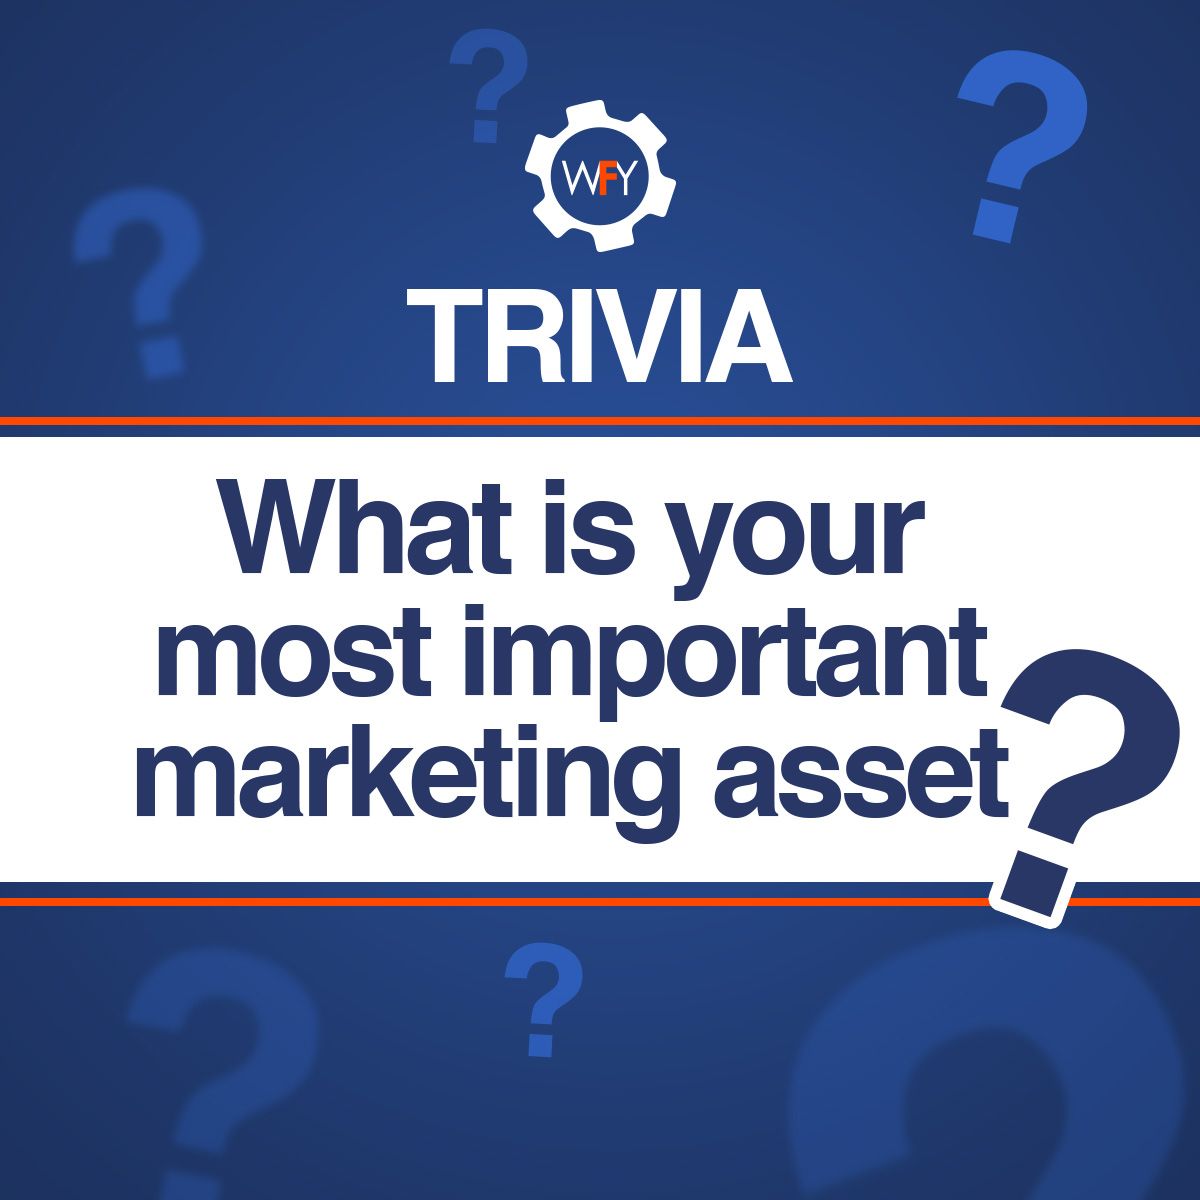 What is your most important marketing asset?